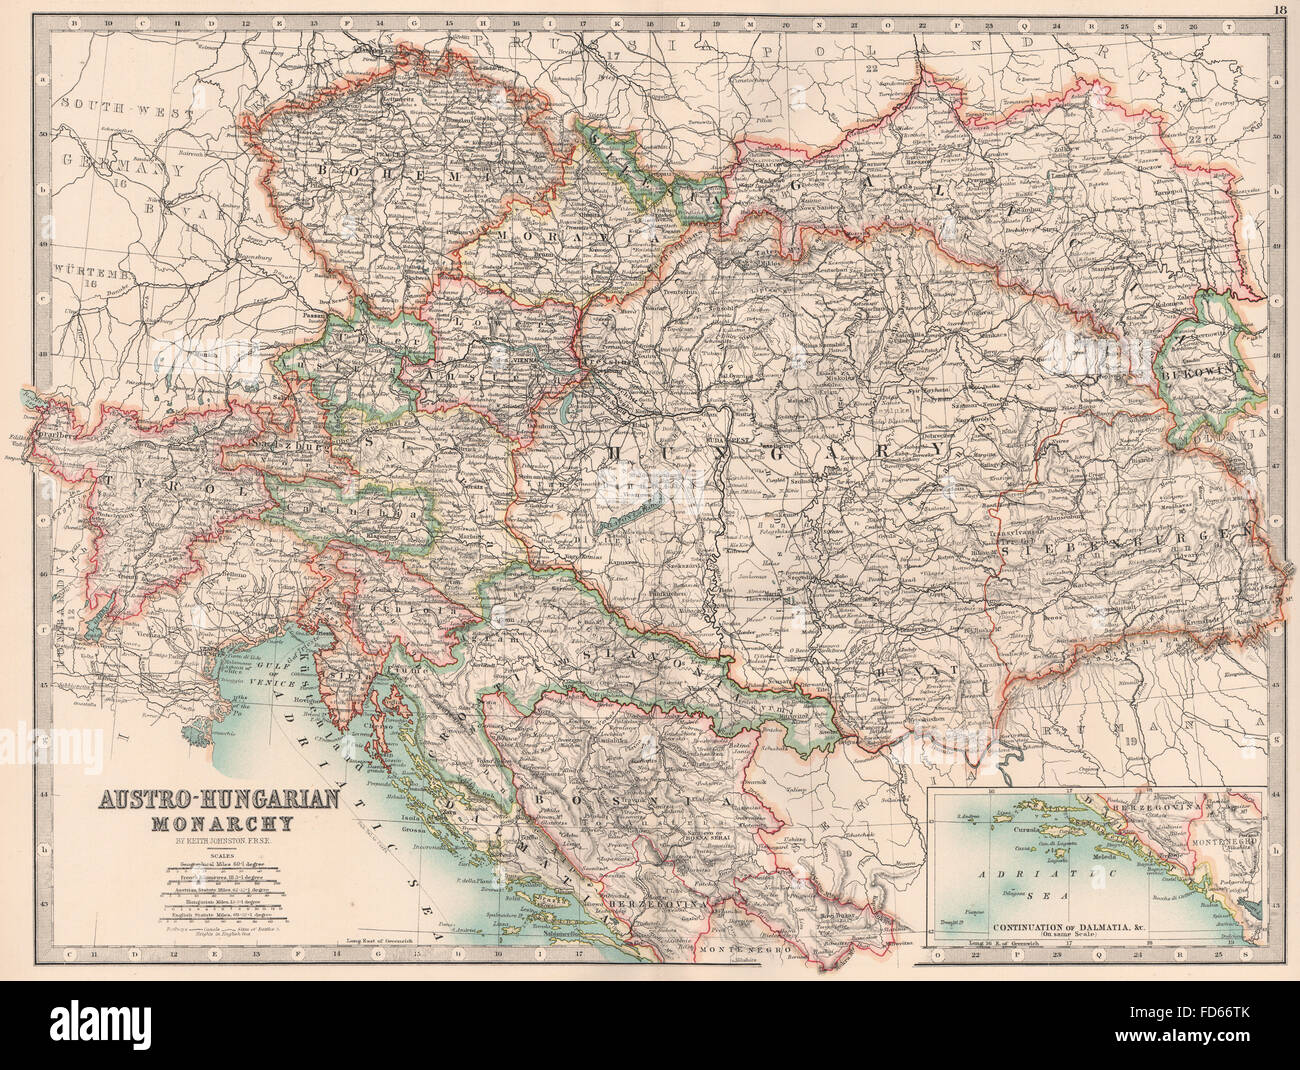 AUSTRO-HUNGARIAN MONARCHY: Provinces Railways Canals. JOHNSTON, 1906 old map Stock Photo